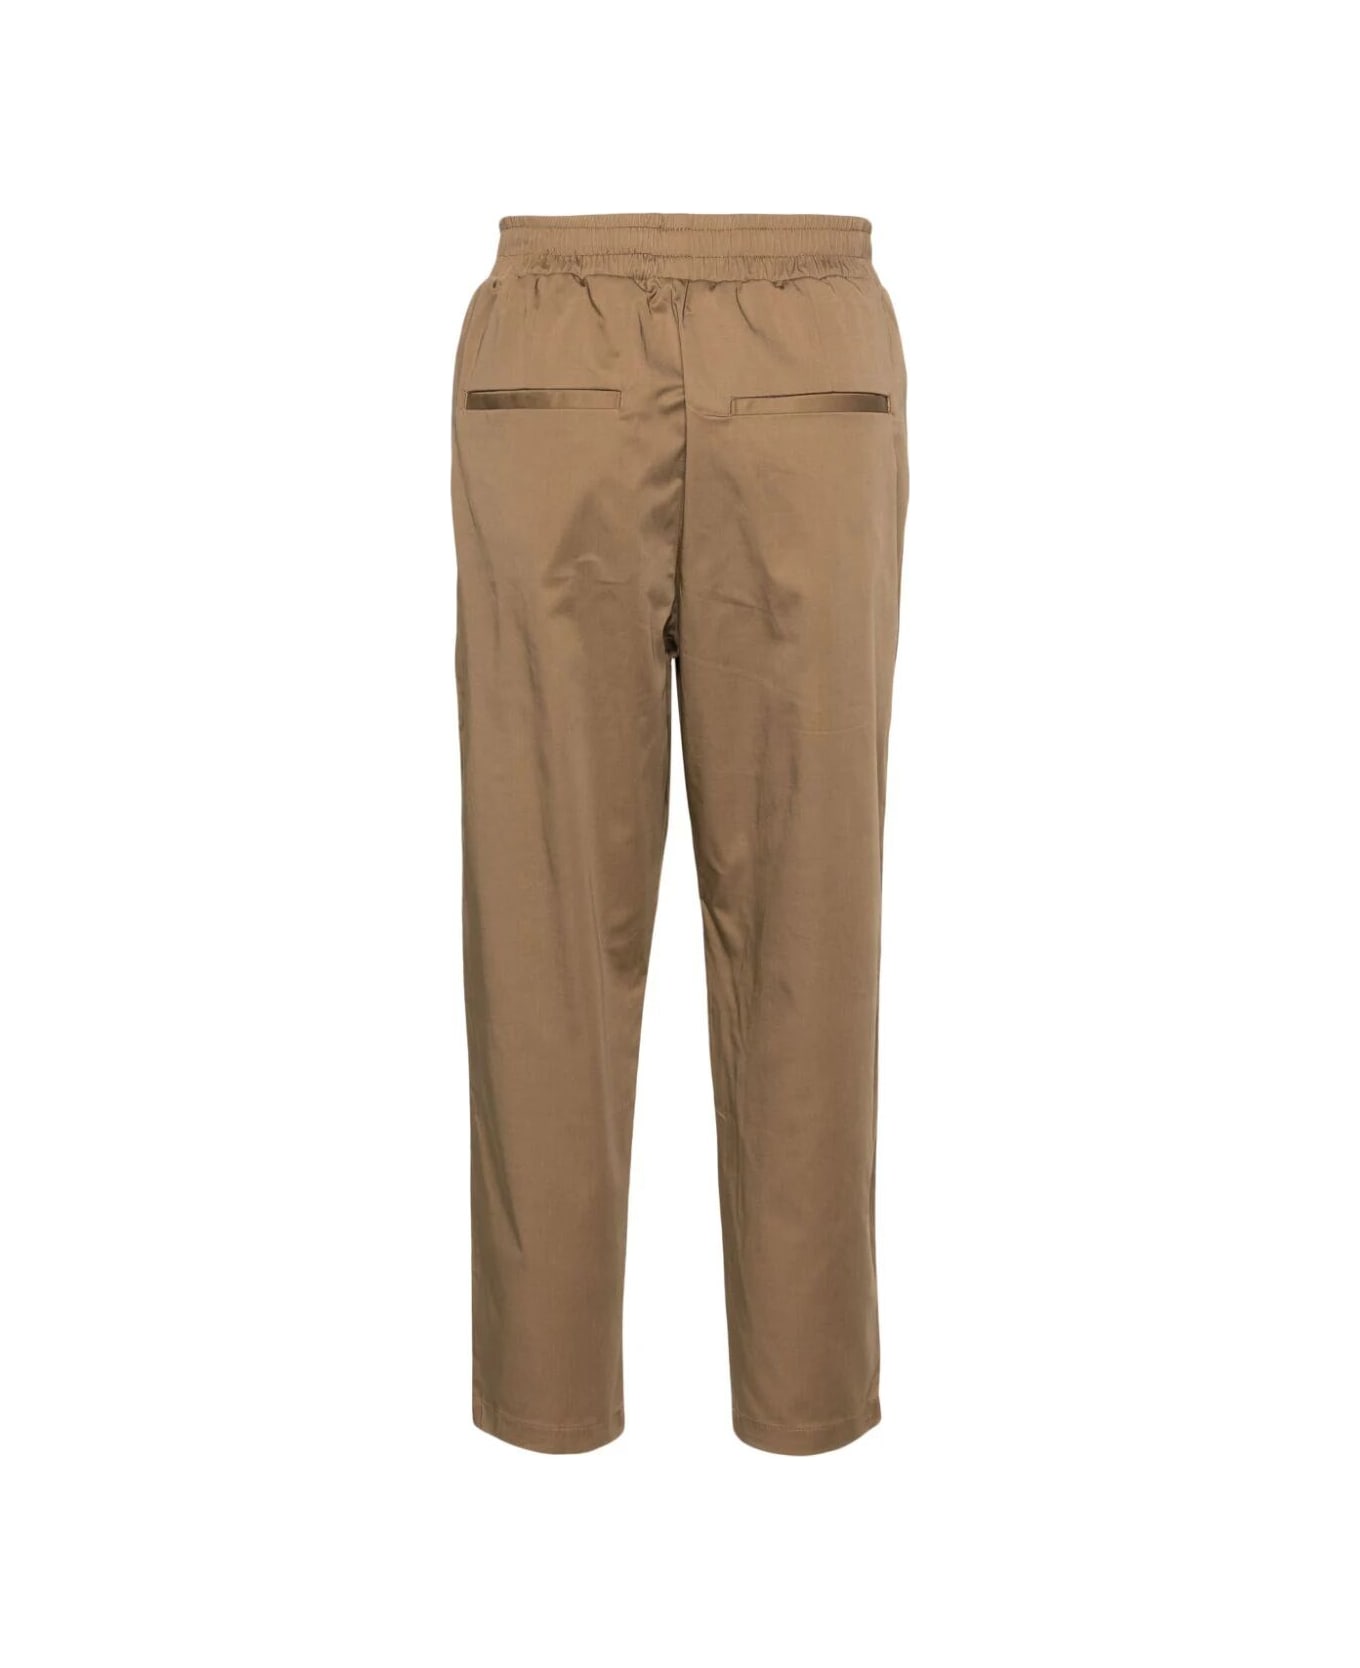 Family First Milano Chino Pants - Beige